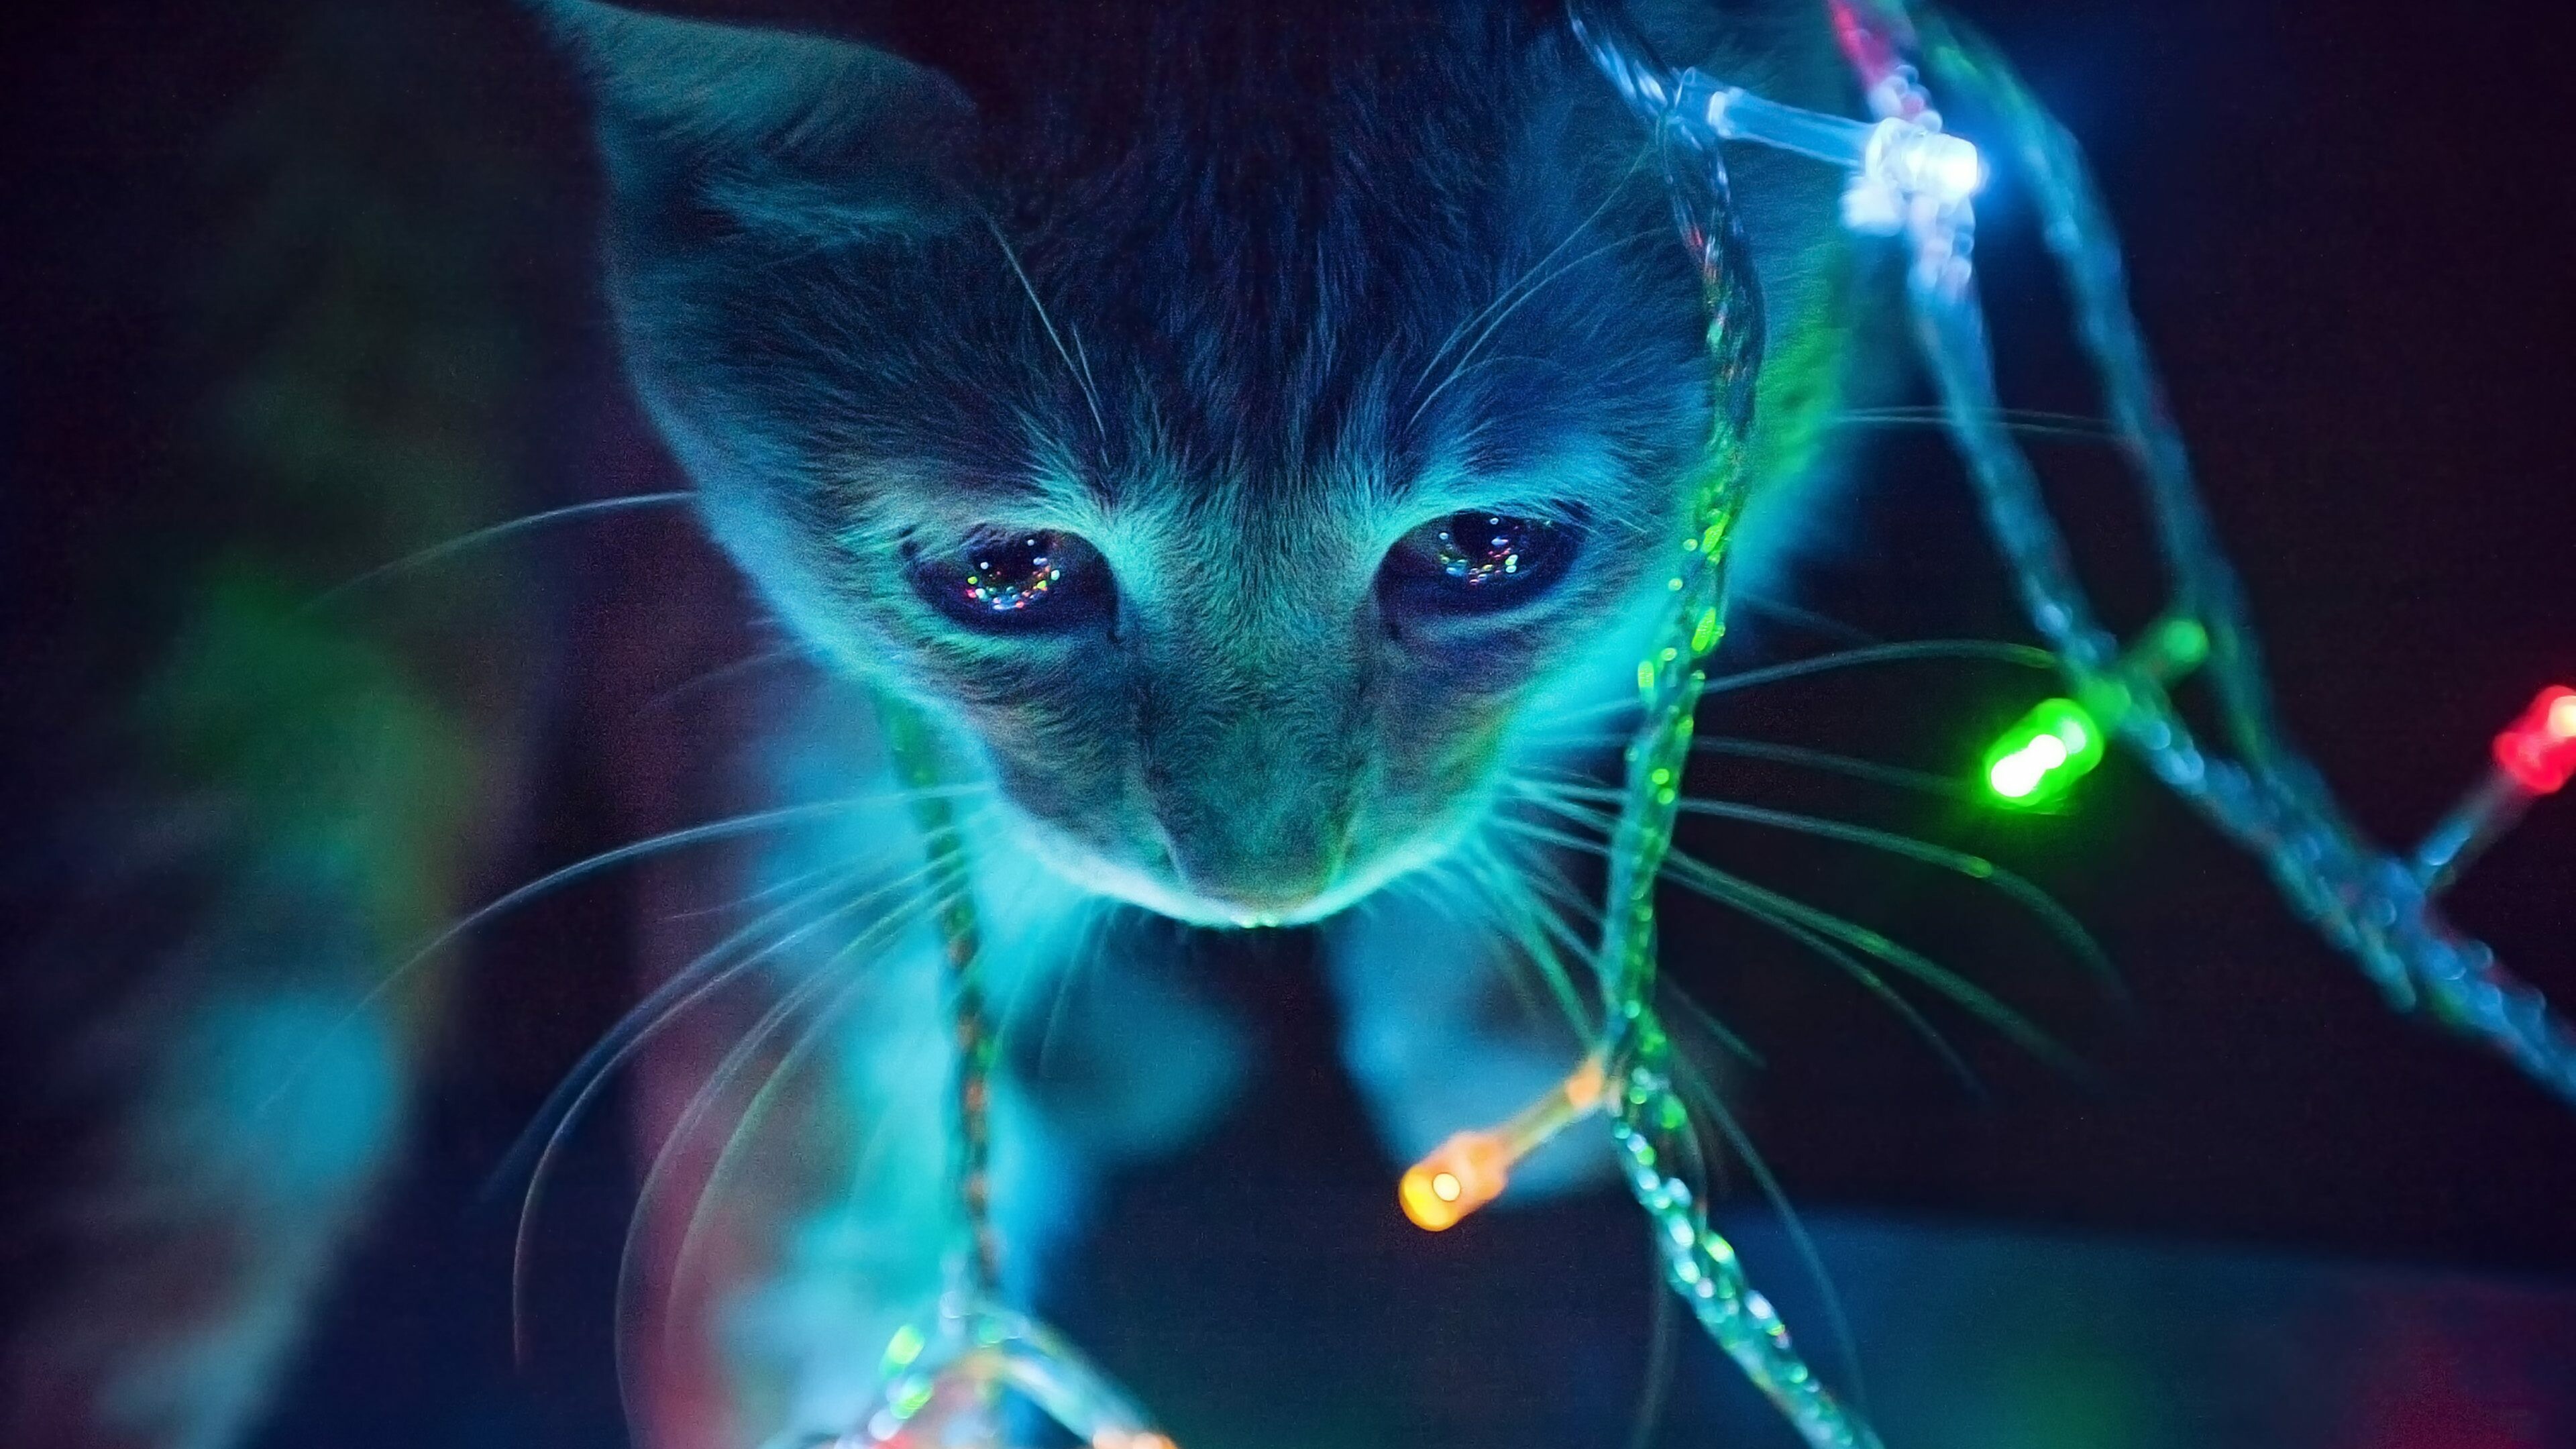 Cute cat with blue lights, Magical ambiance, Whimsical charm, Mesmerizing glow, 3840x2160 4K Desktop